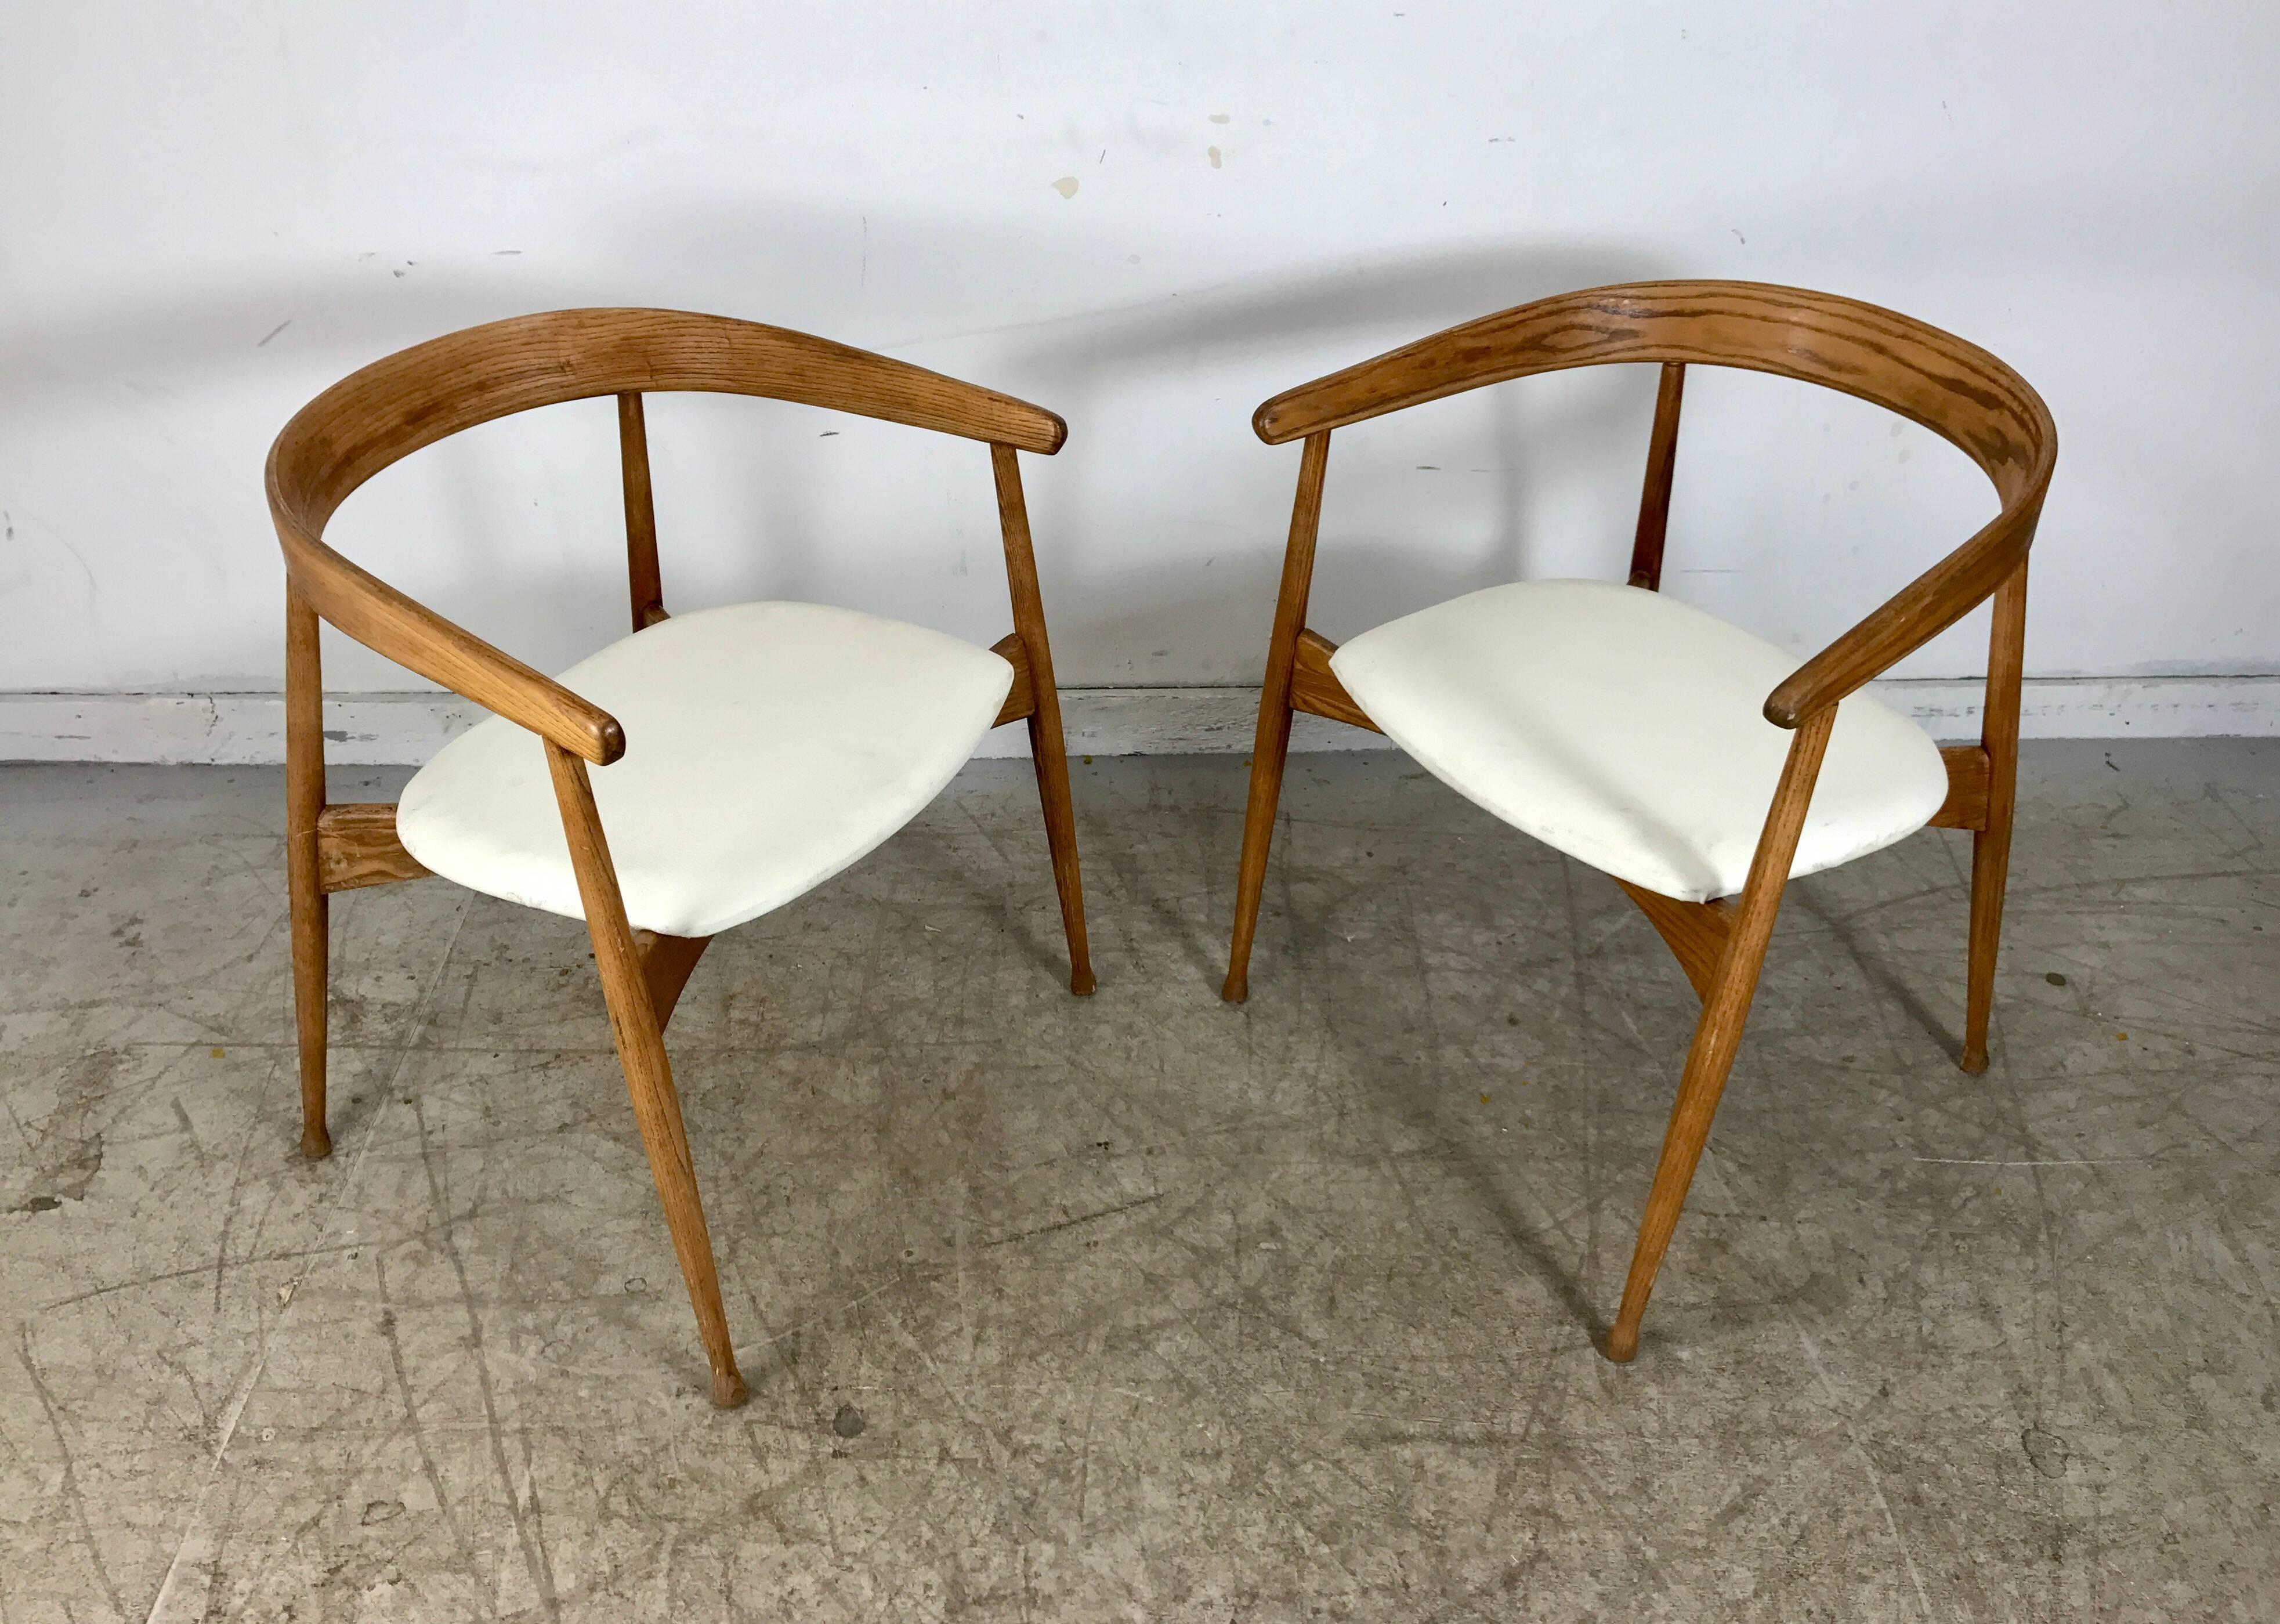 Matched pair of American Danish armchairs in the style of famed Danish designer, Hans Wegner. Sculptural yet elegant design, Classic bent oak construction, extremely comfortable.